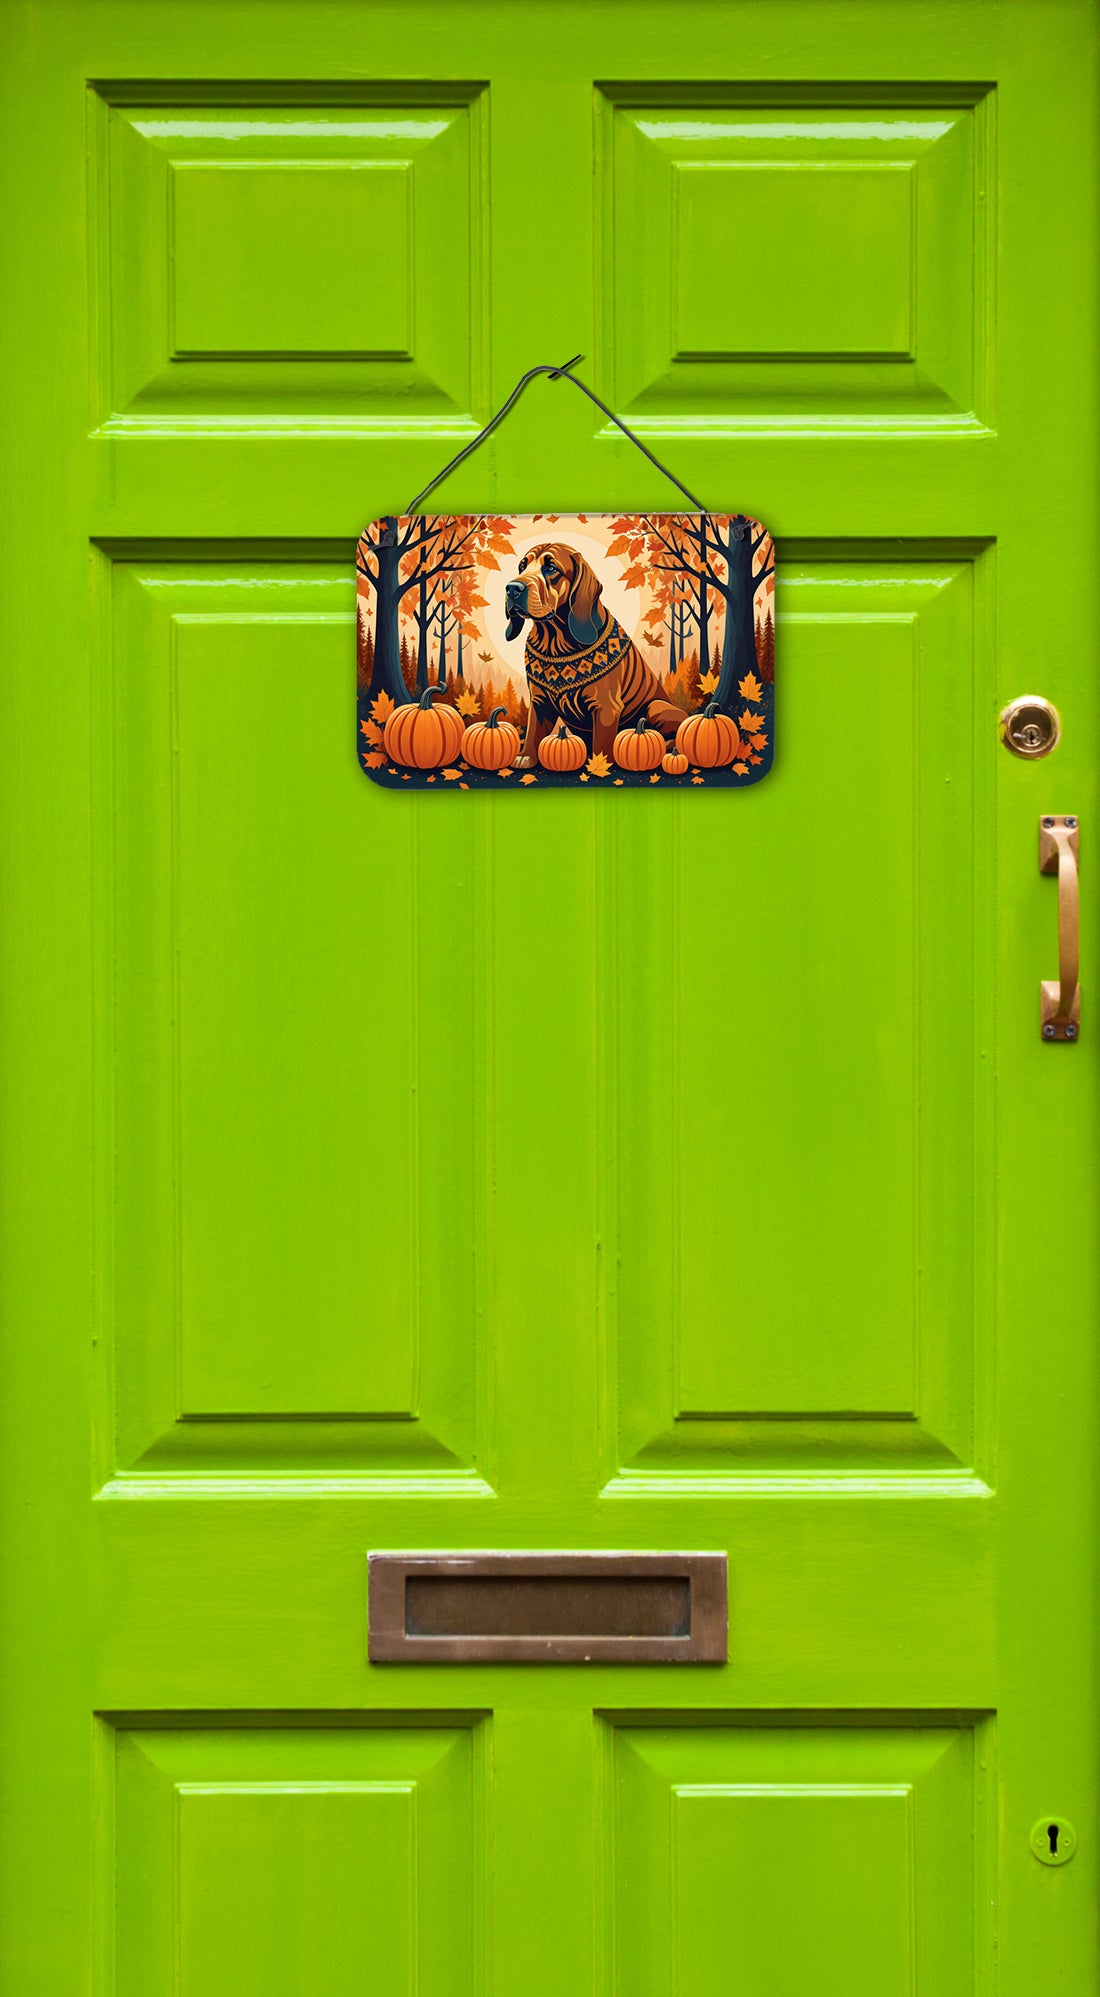 Buy this Bloodhound Fall Wall or Door Hanging Prints